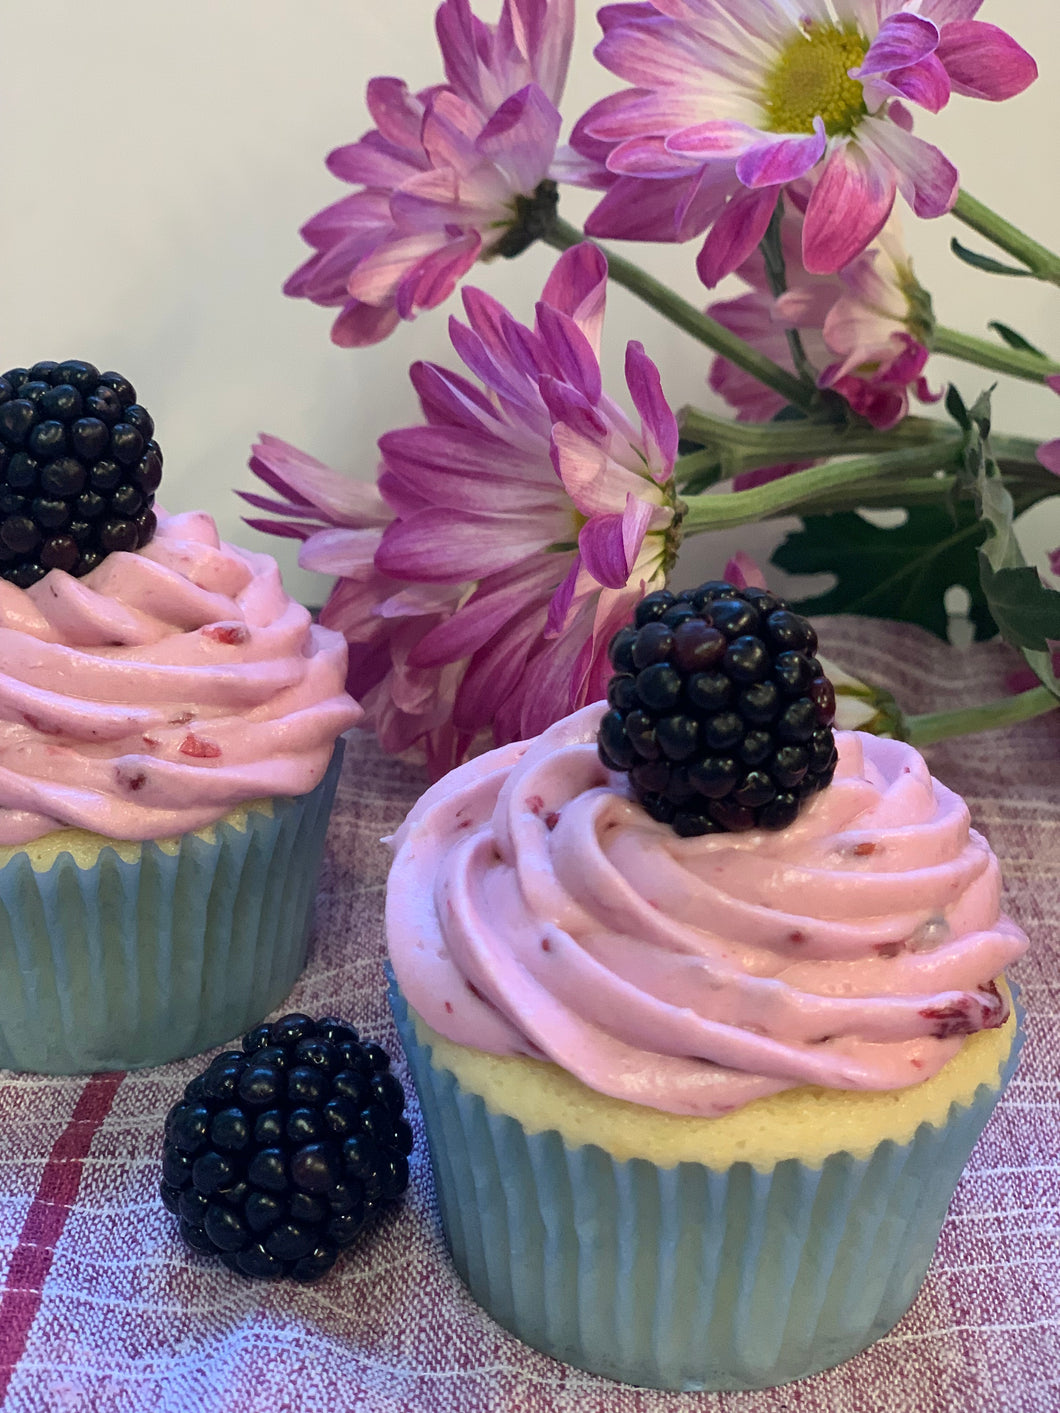 Lemon Blackberry Cupcakes with Cream Cheese Frosting